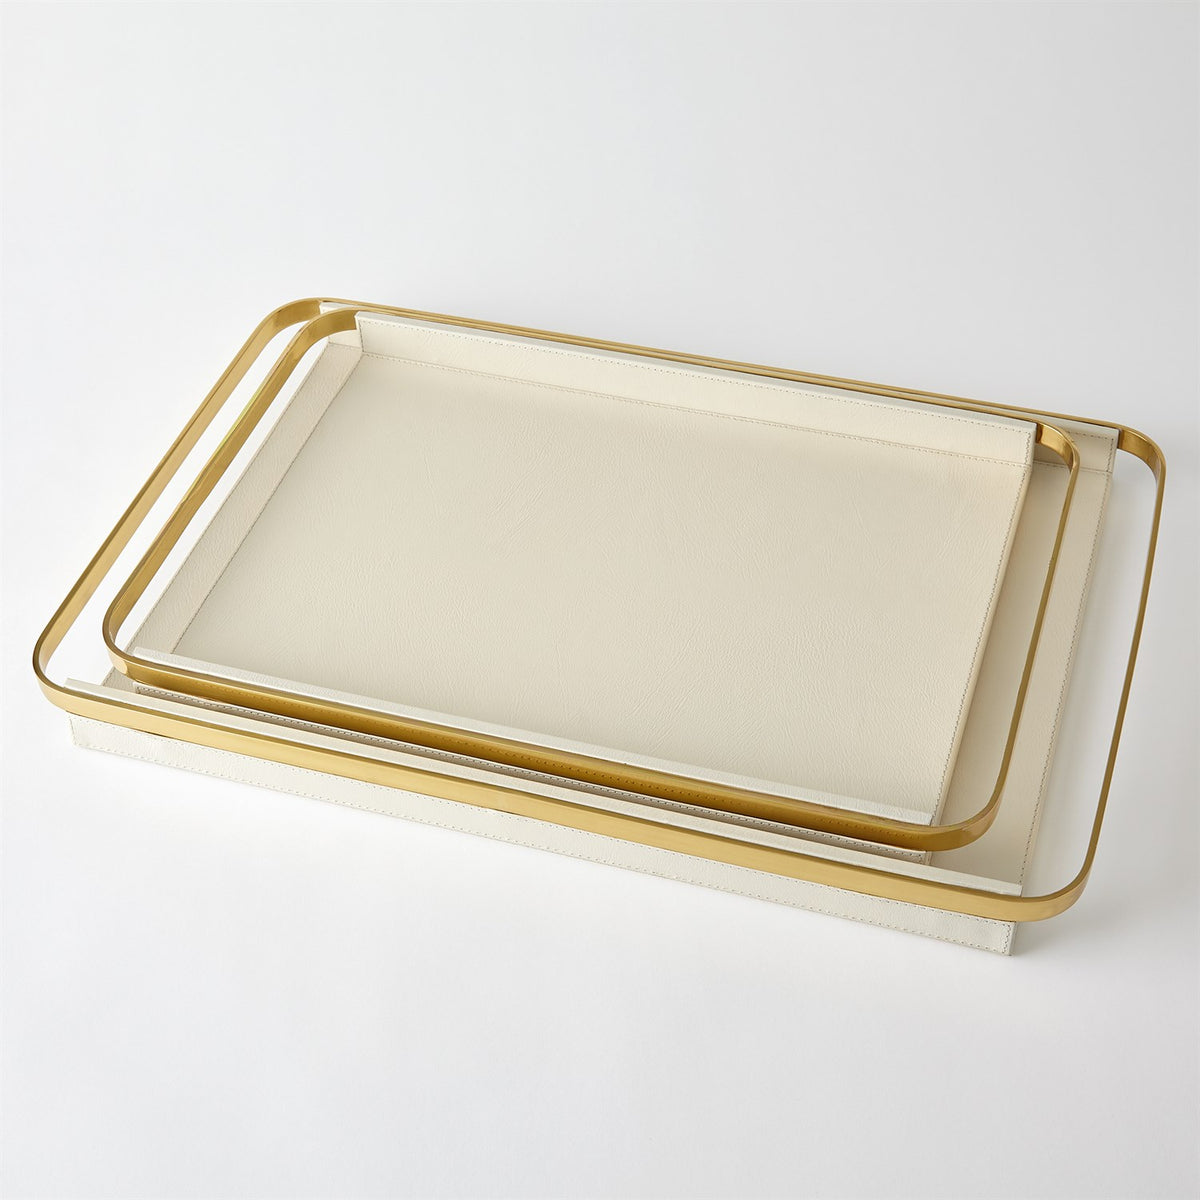 Avery Serving Tray-Milk-Global Views-Trays-Artistic Elements